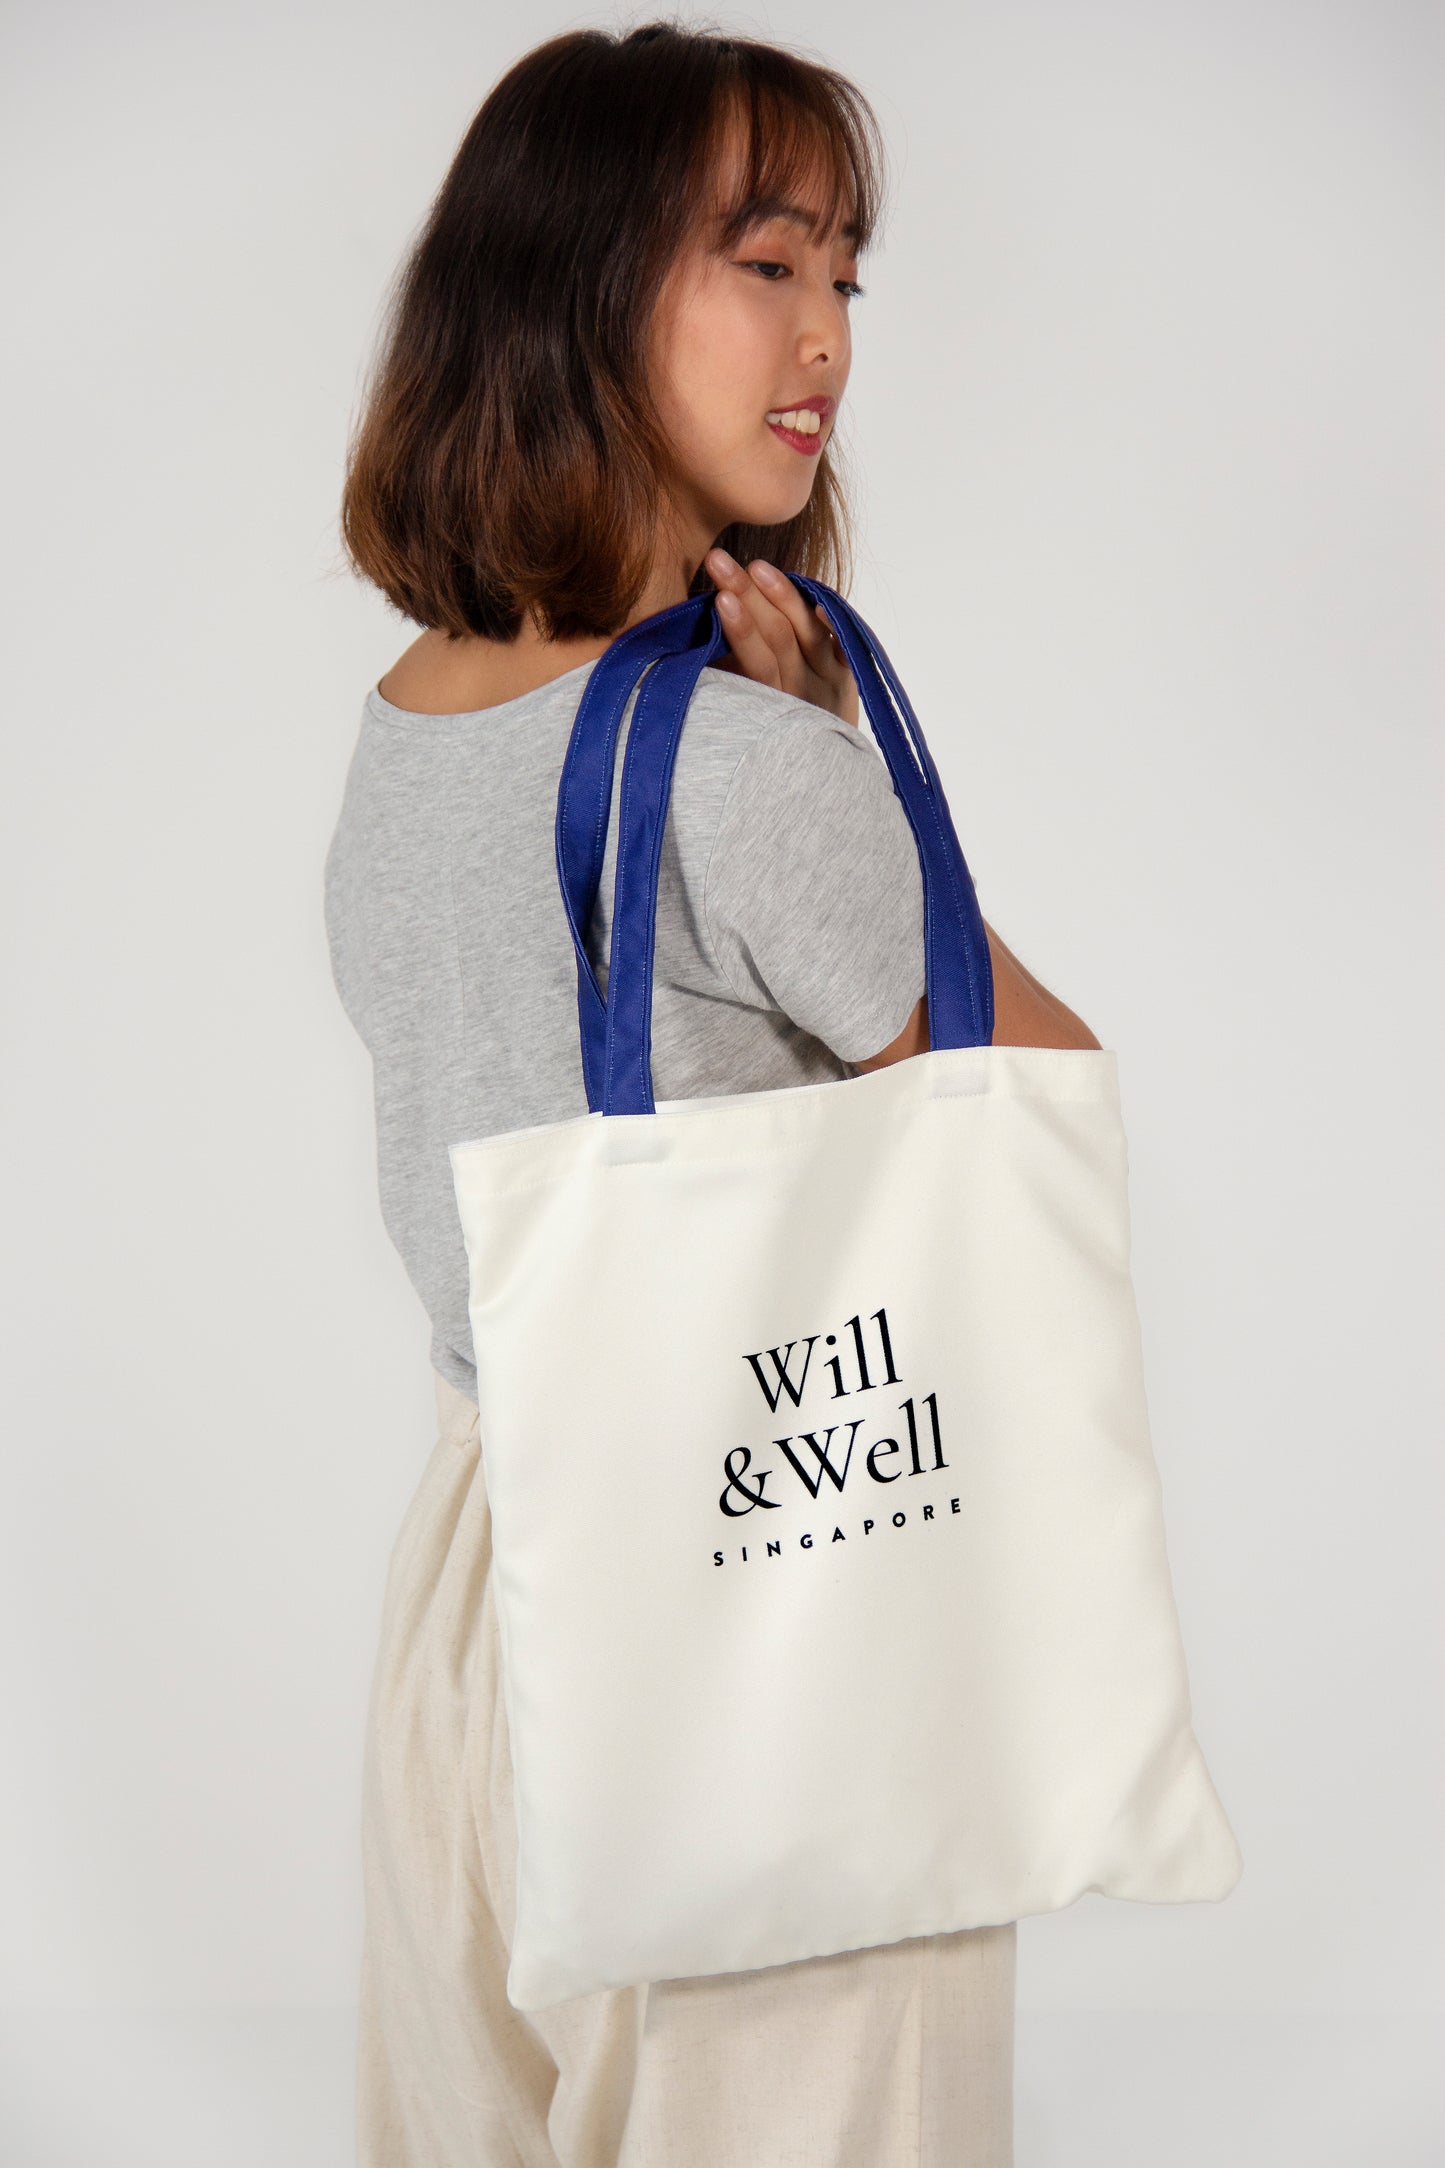 Will & Well Tote Bag